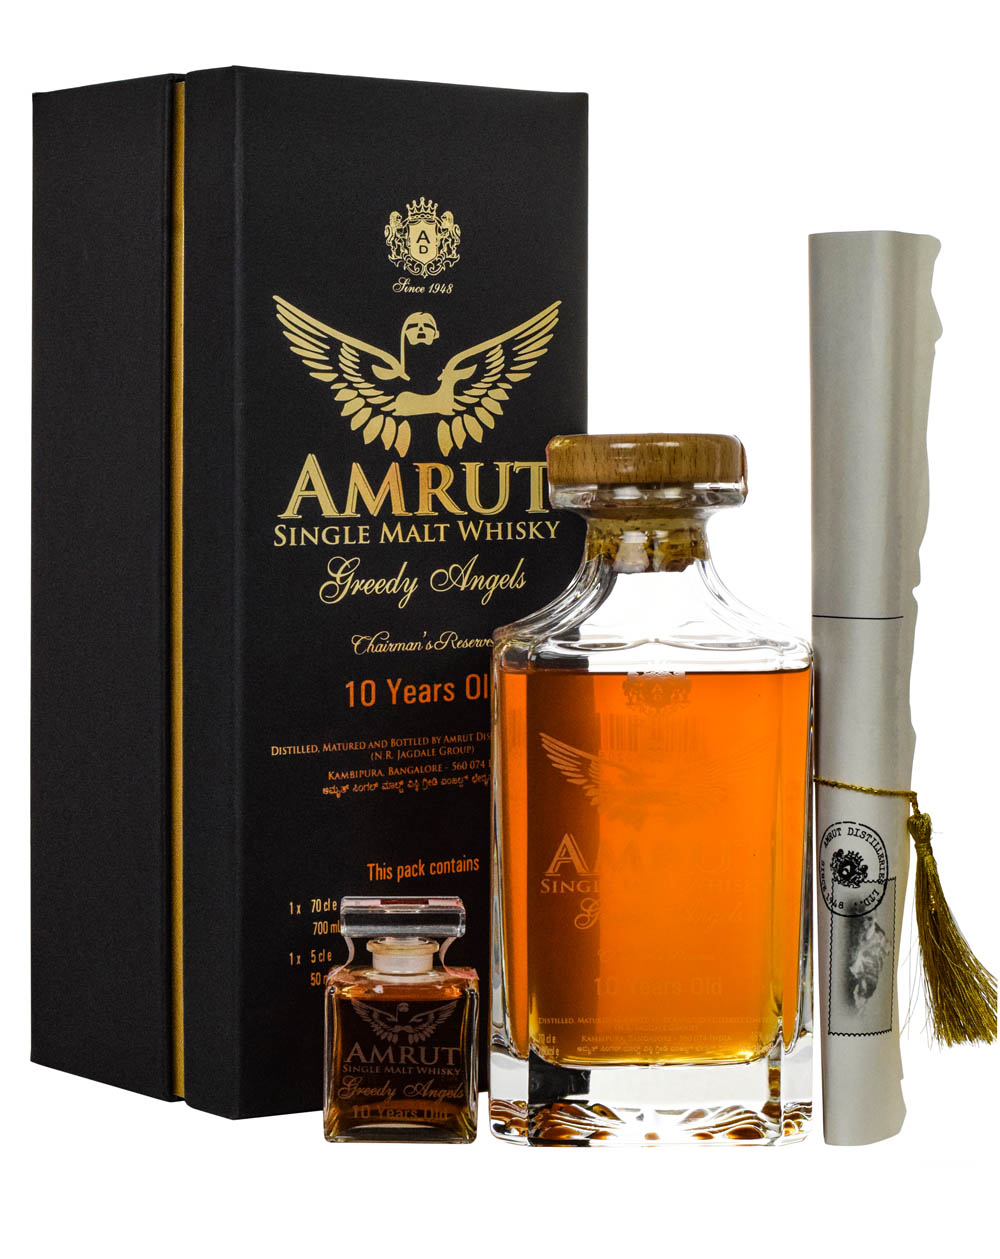 Amrut 10 Years Old Greedy Angels Chairman’s Reserve + Miniature Box Must Have Malts MHM